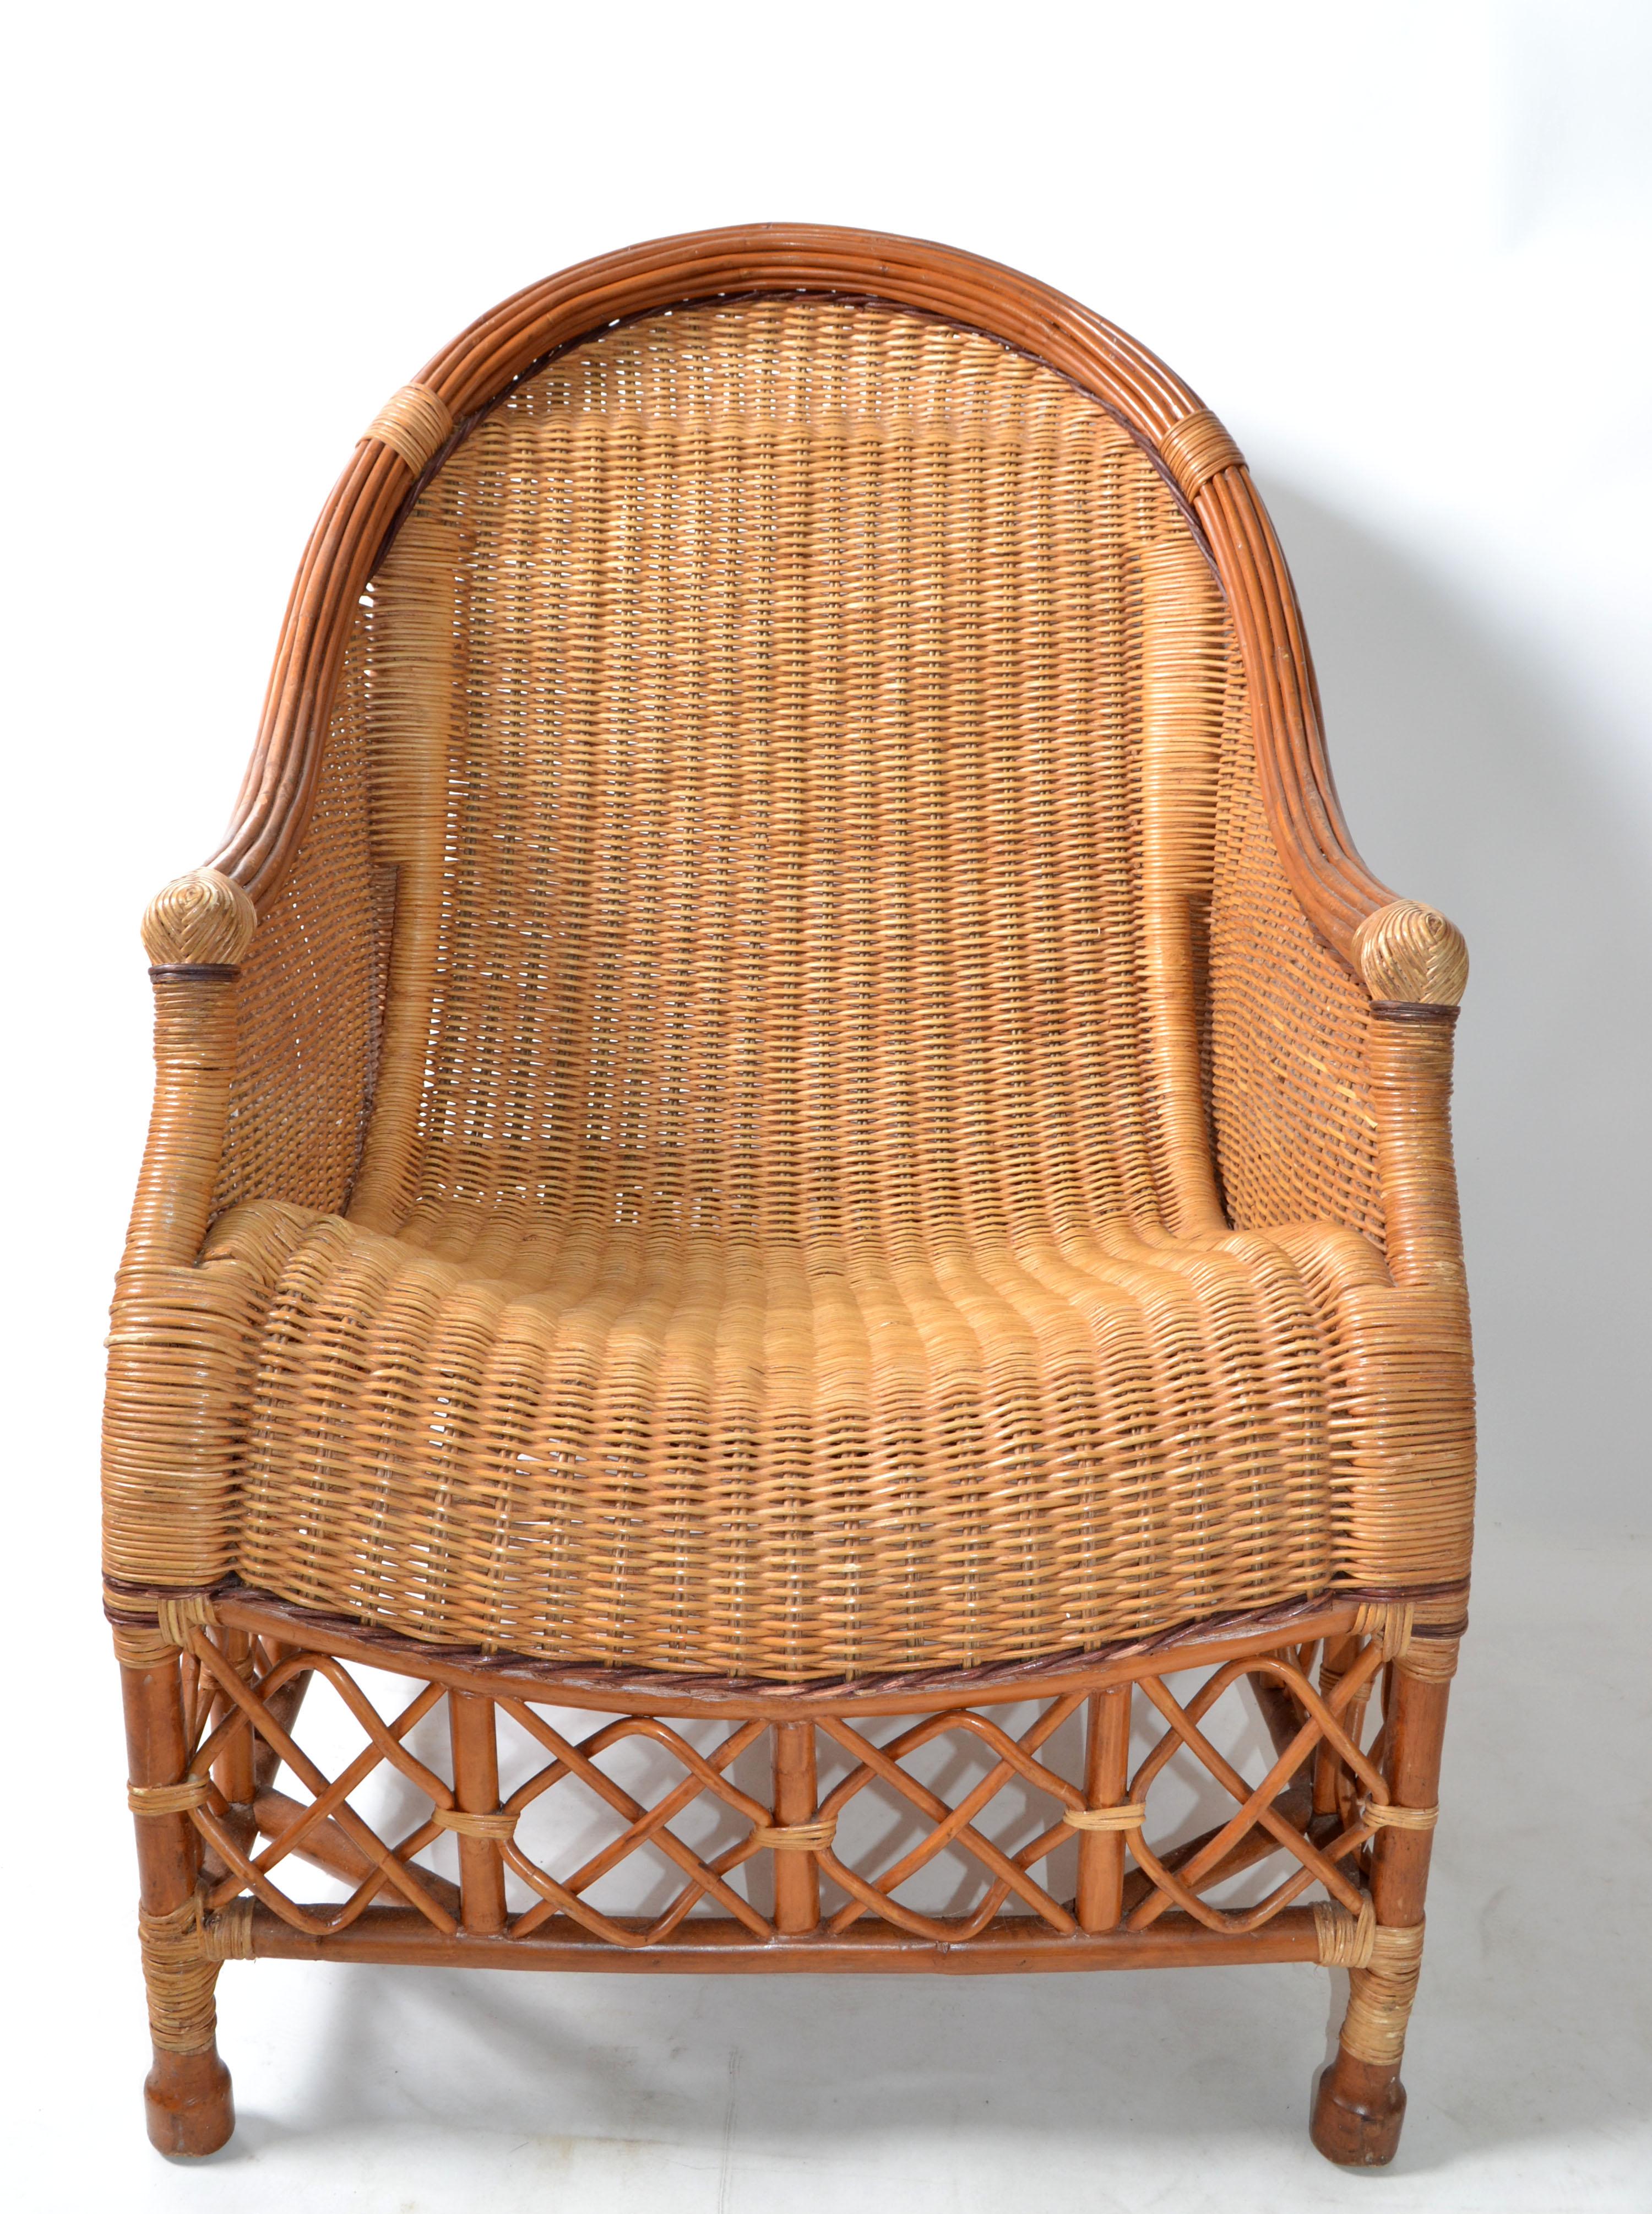 Large and Comfortable handcrafted and woven Bamboo and Wicker Lounge Chair with Cane Bindings.
Firm and sturdy and ready to use.
Exceptional Lounge Chair for Your Florida Sunroom. 
Arm Height measures: 25 inches.